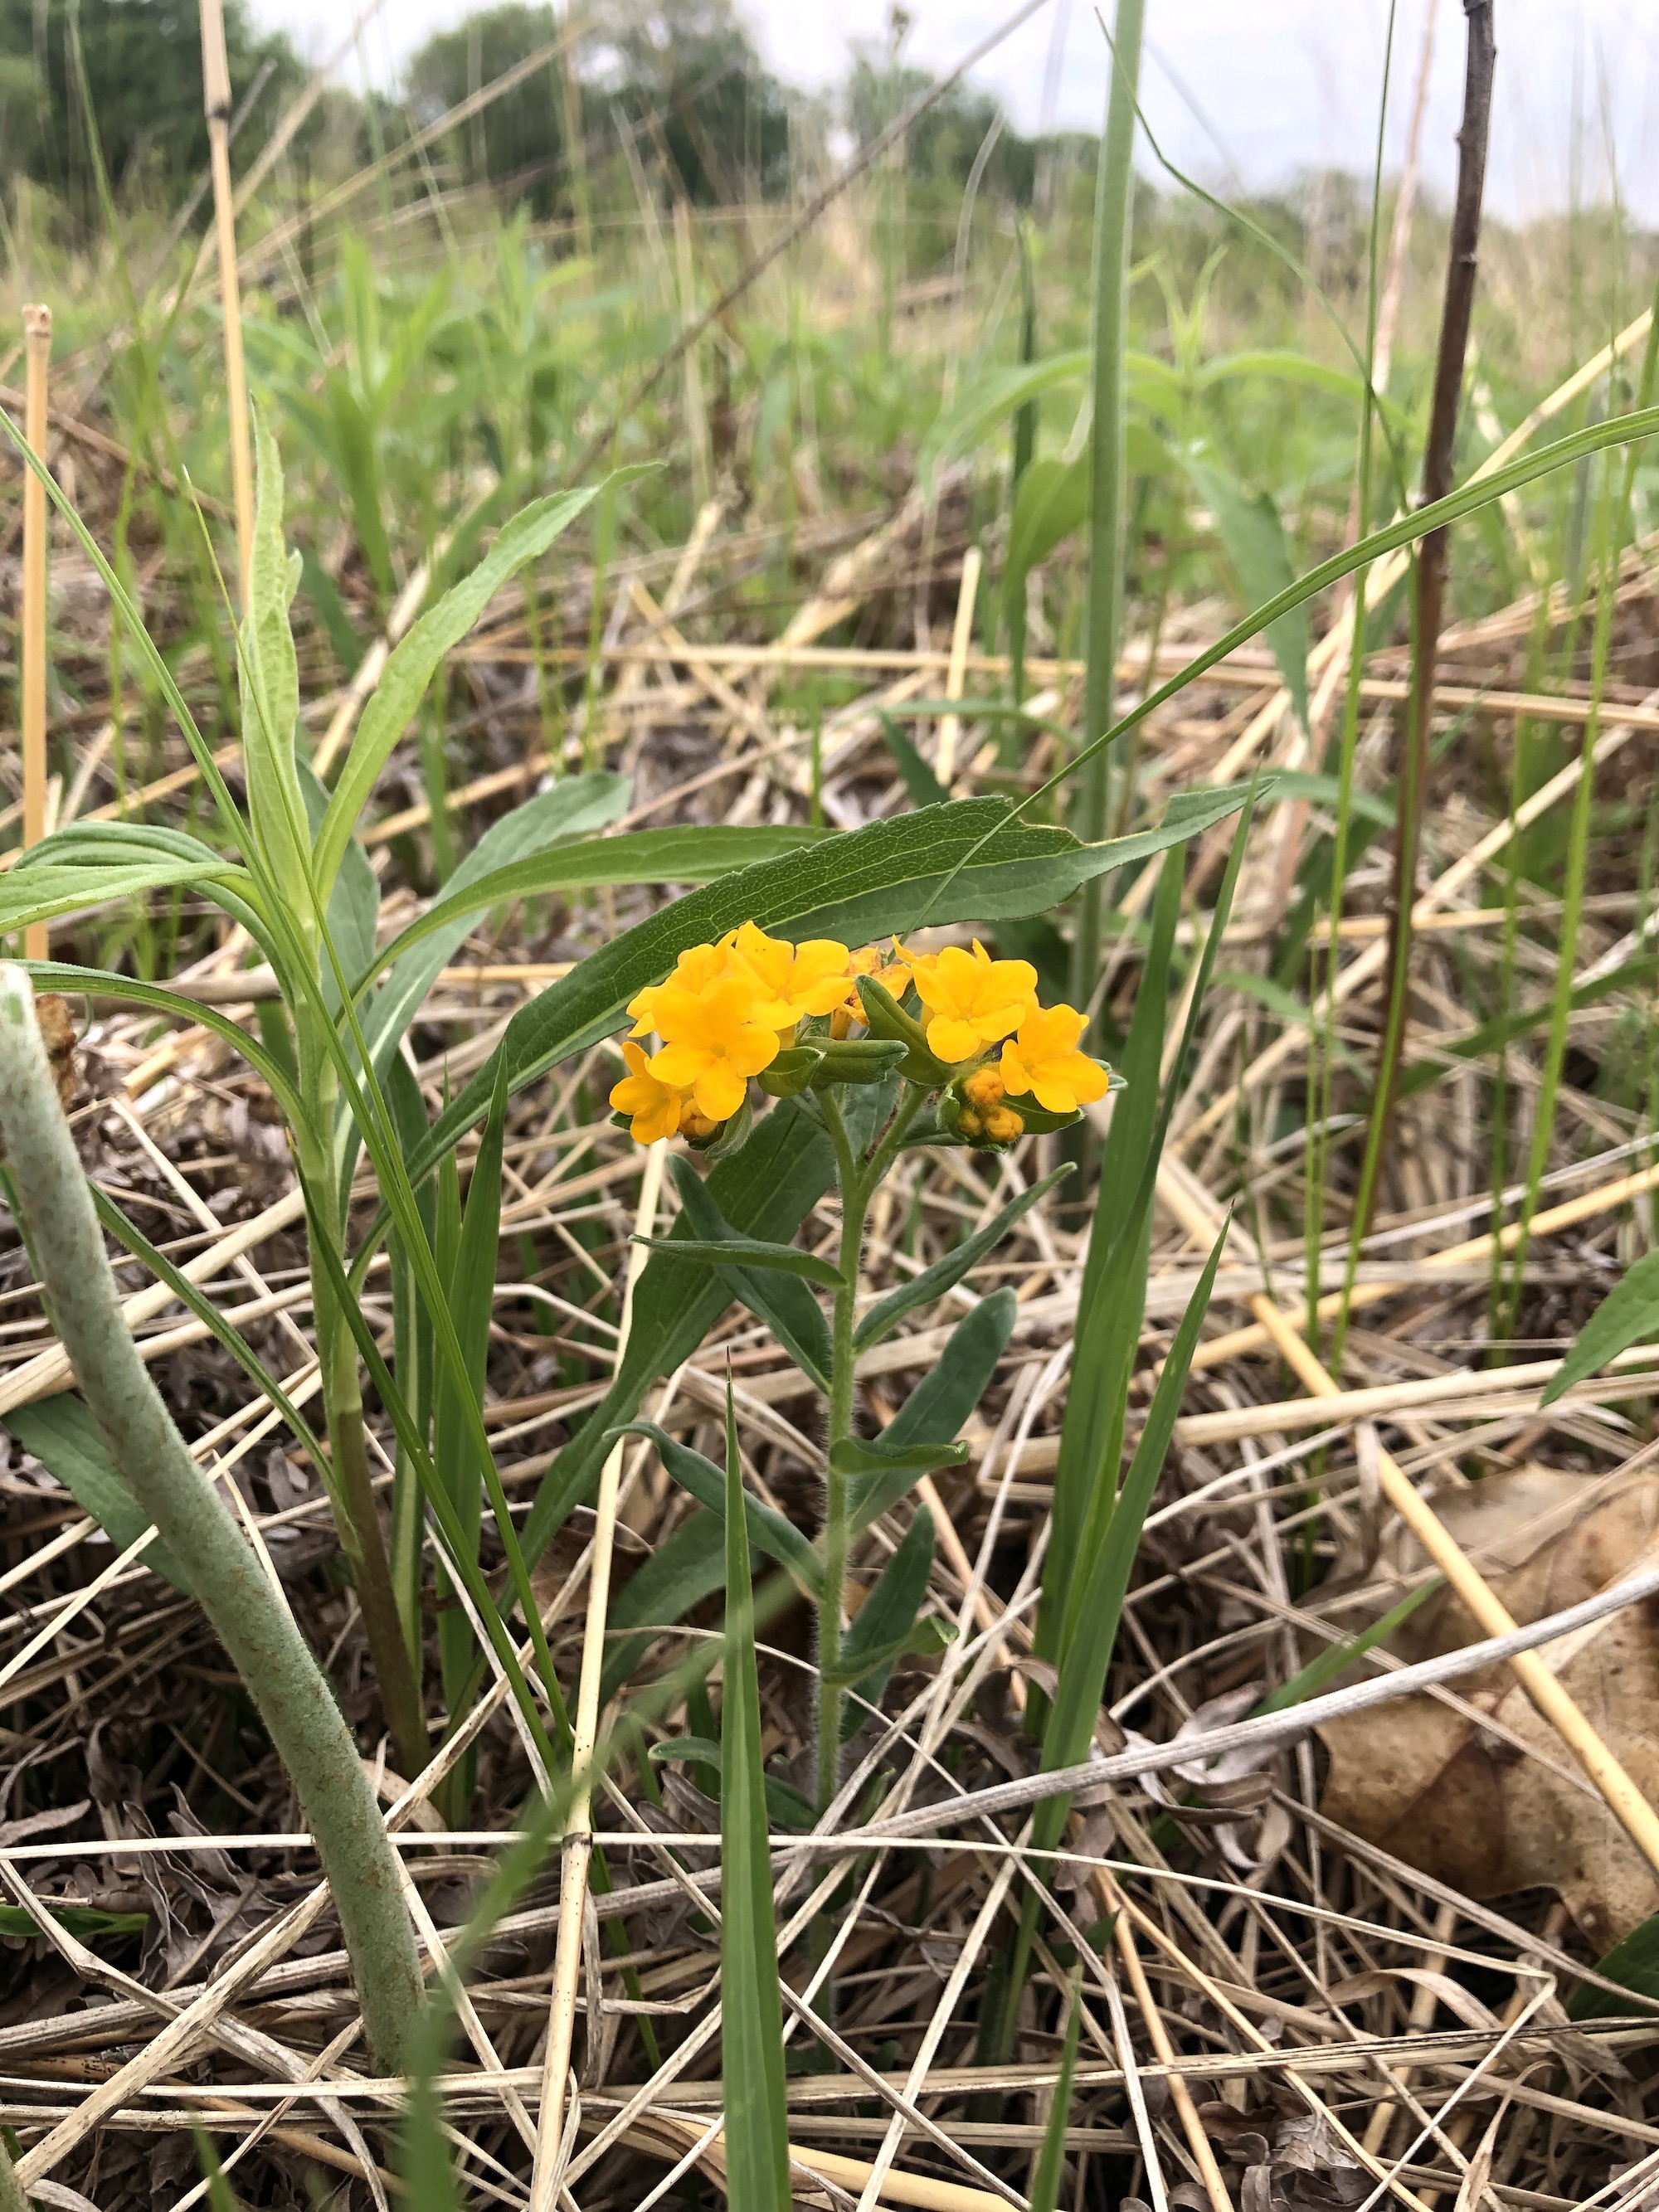 Hoary Puccoon in the Curtis Prairie in the University of Wisconsin-Madison Arboretum in Madison, Wisconsin on May 21, 2022.